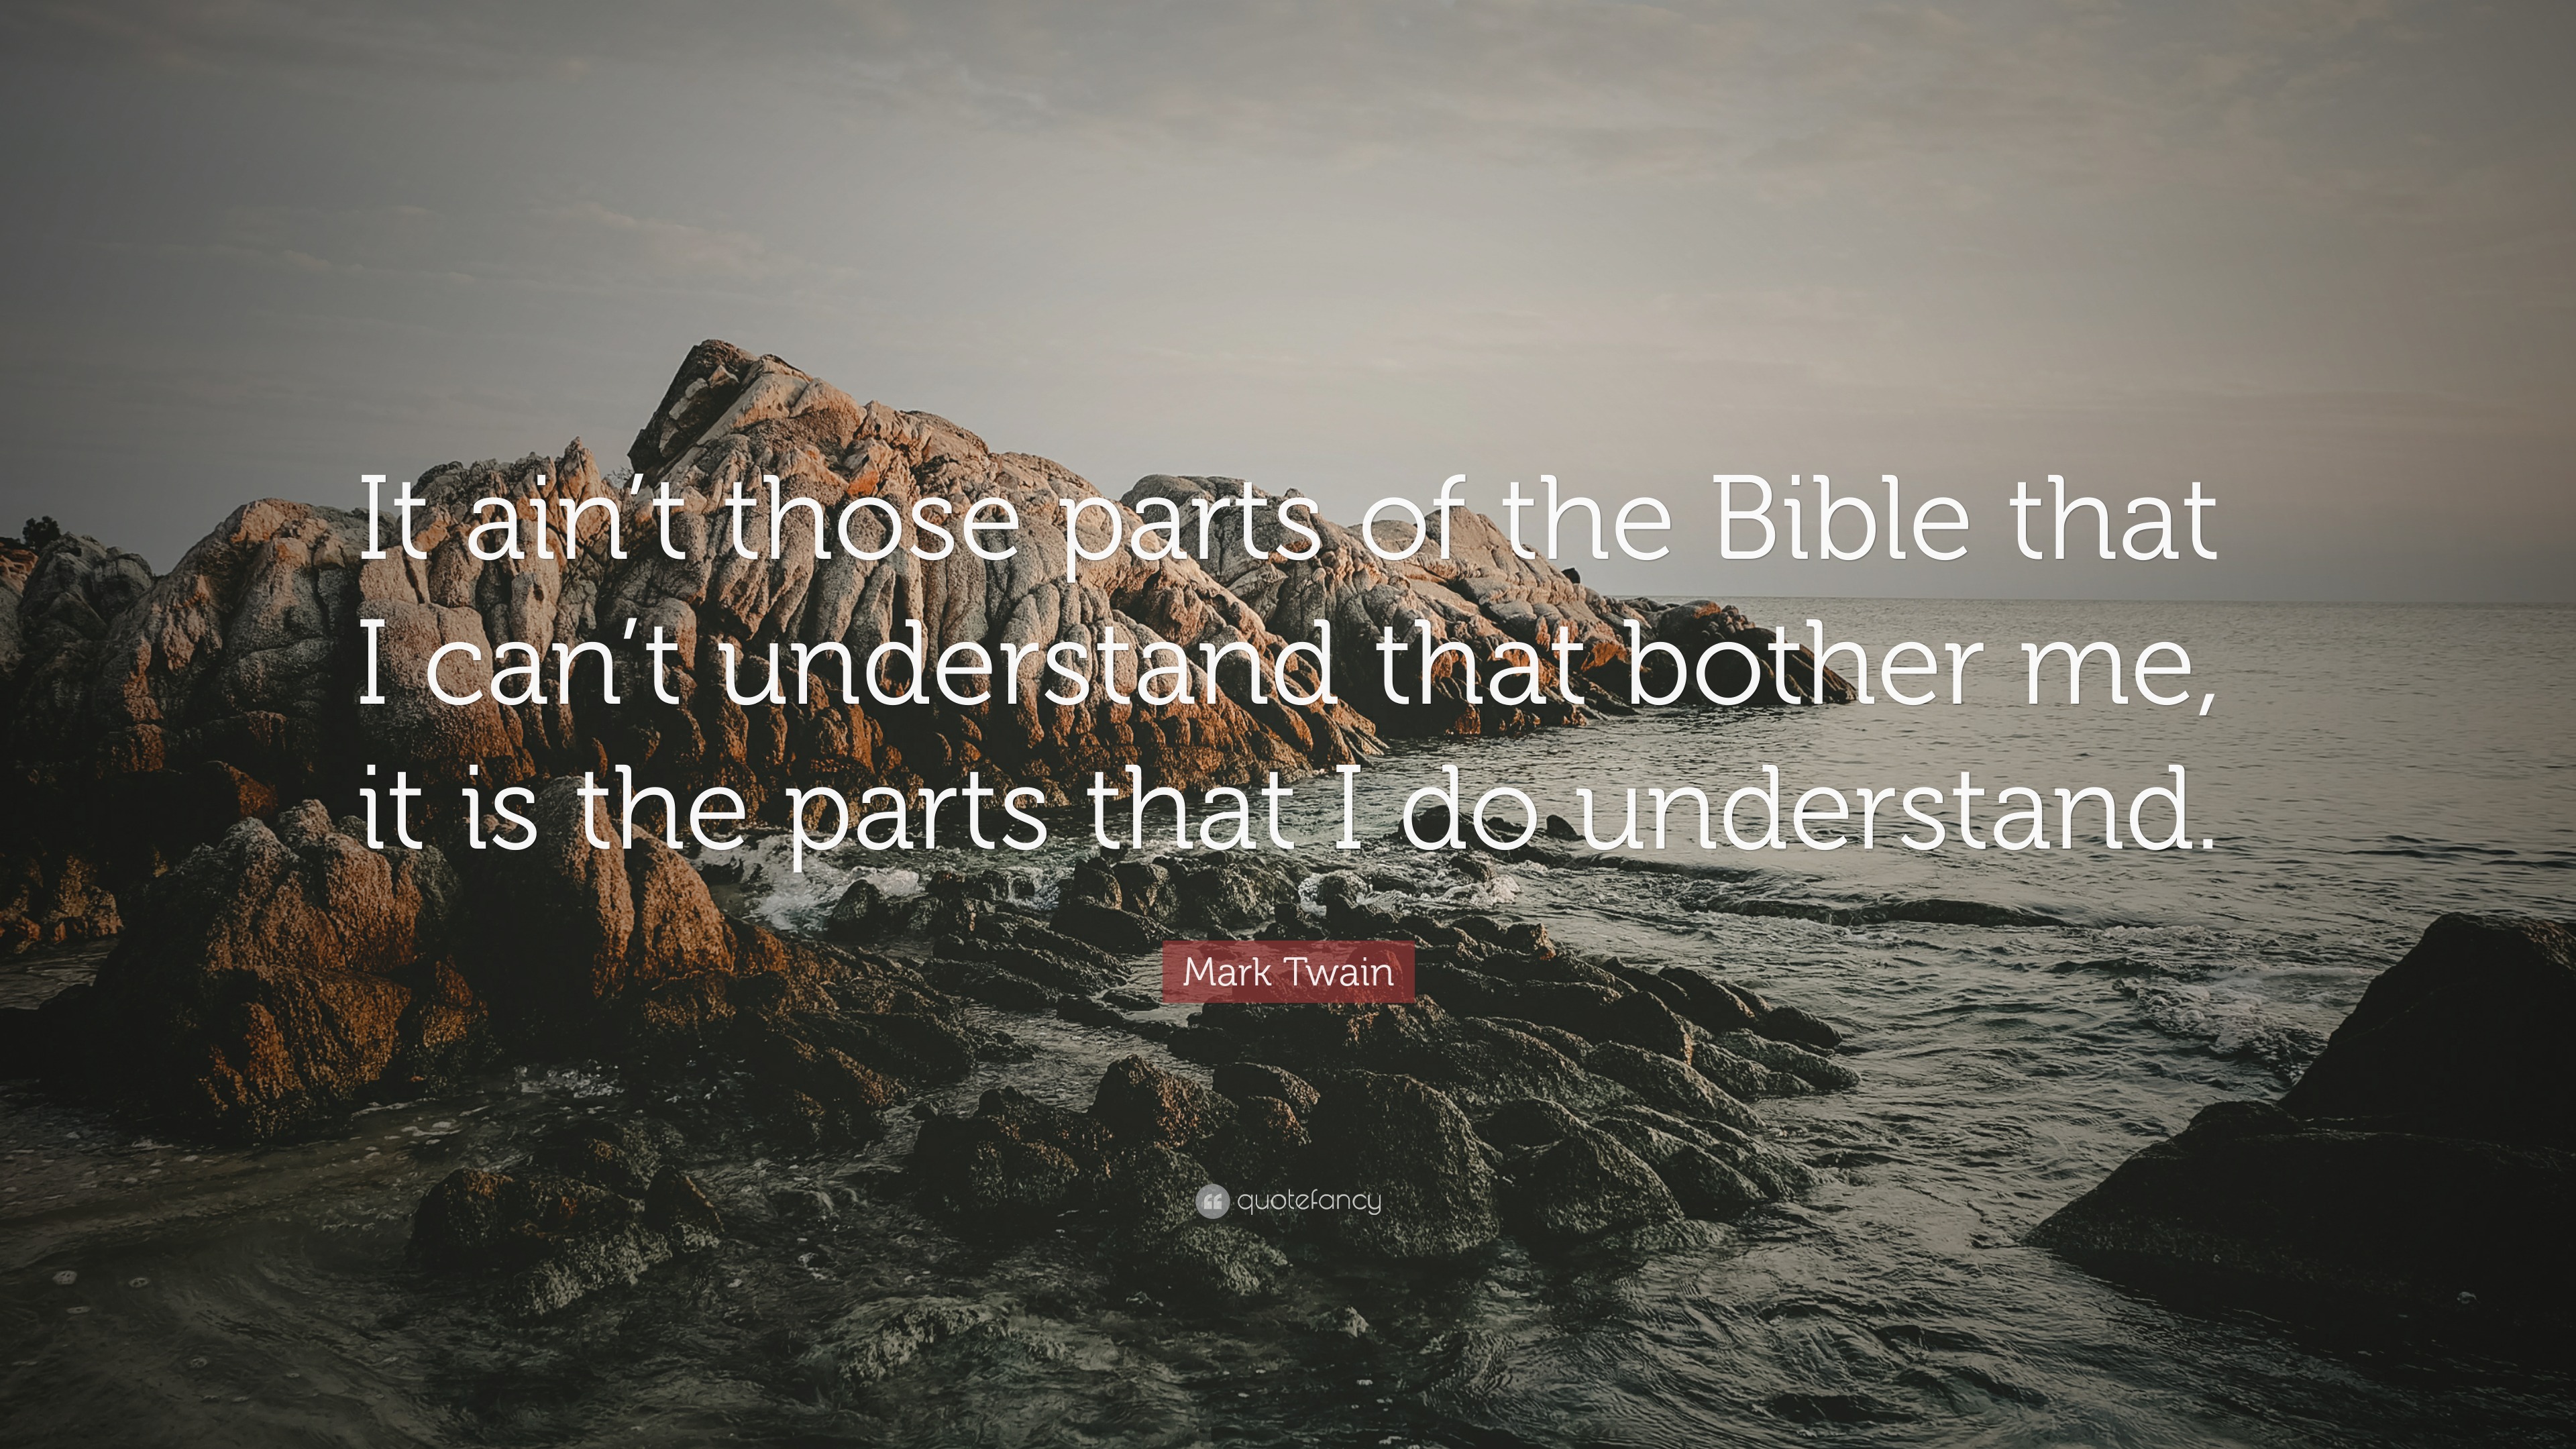 Mark Twain Quote: “It ain’t those parts of the Bible that I can’t ...